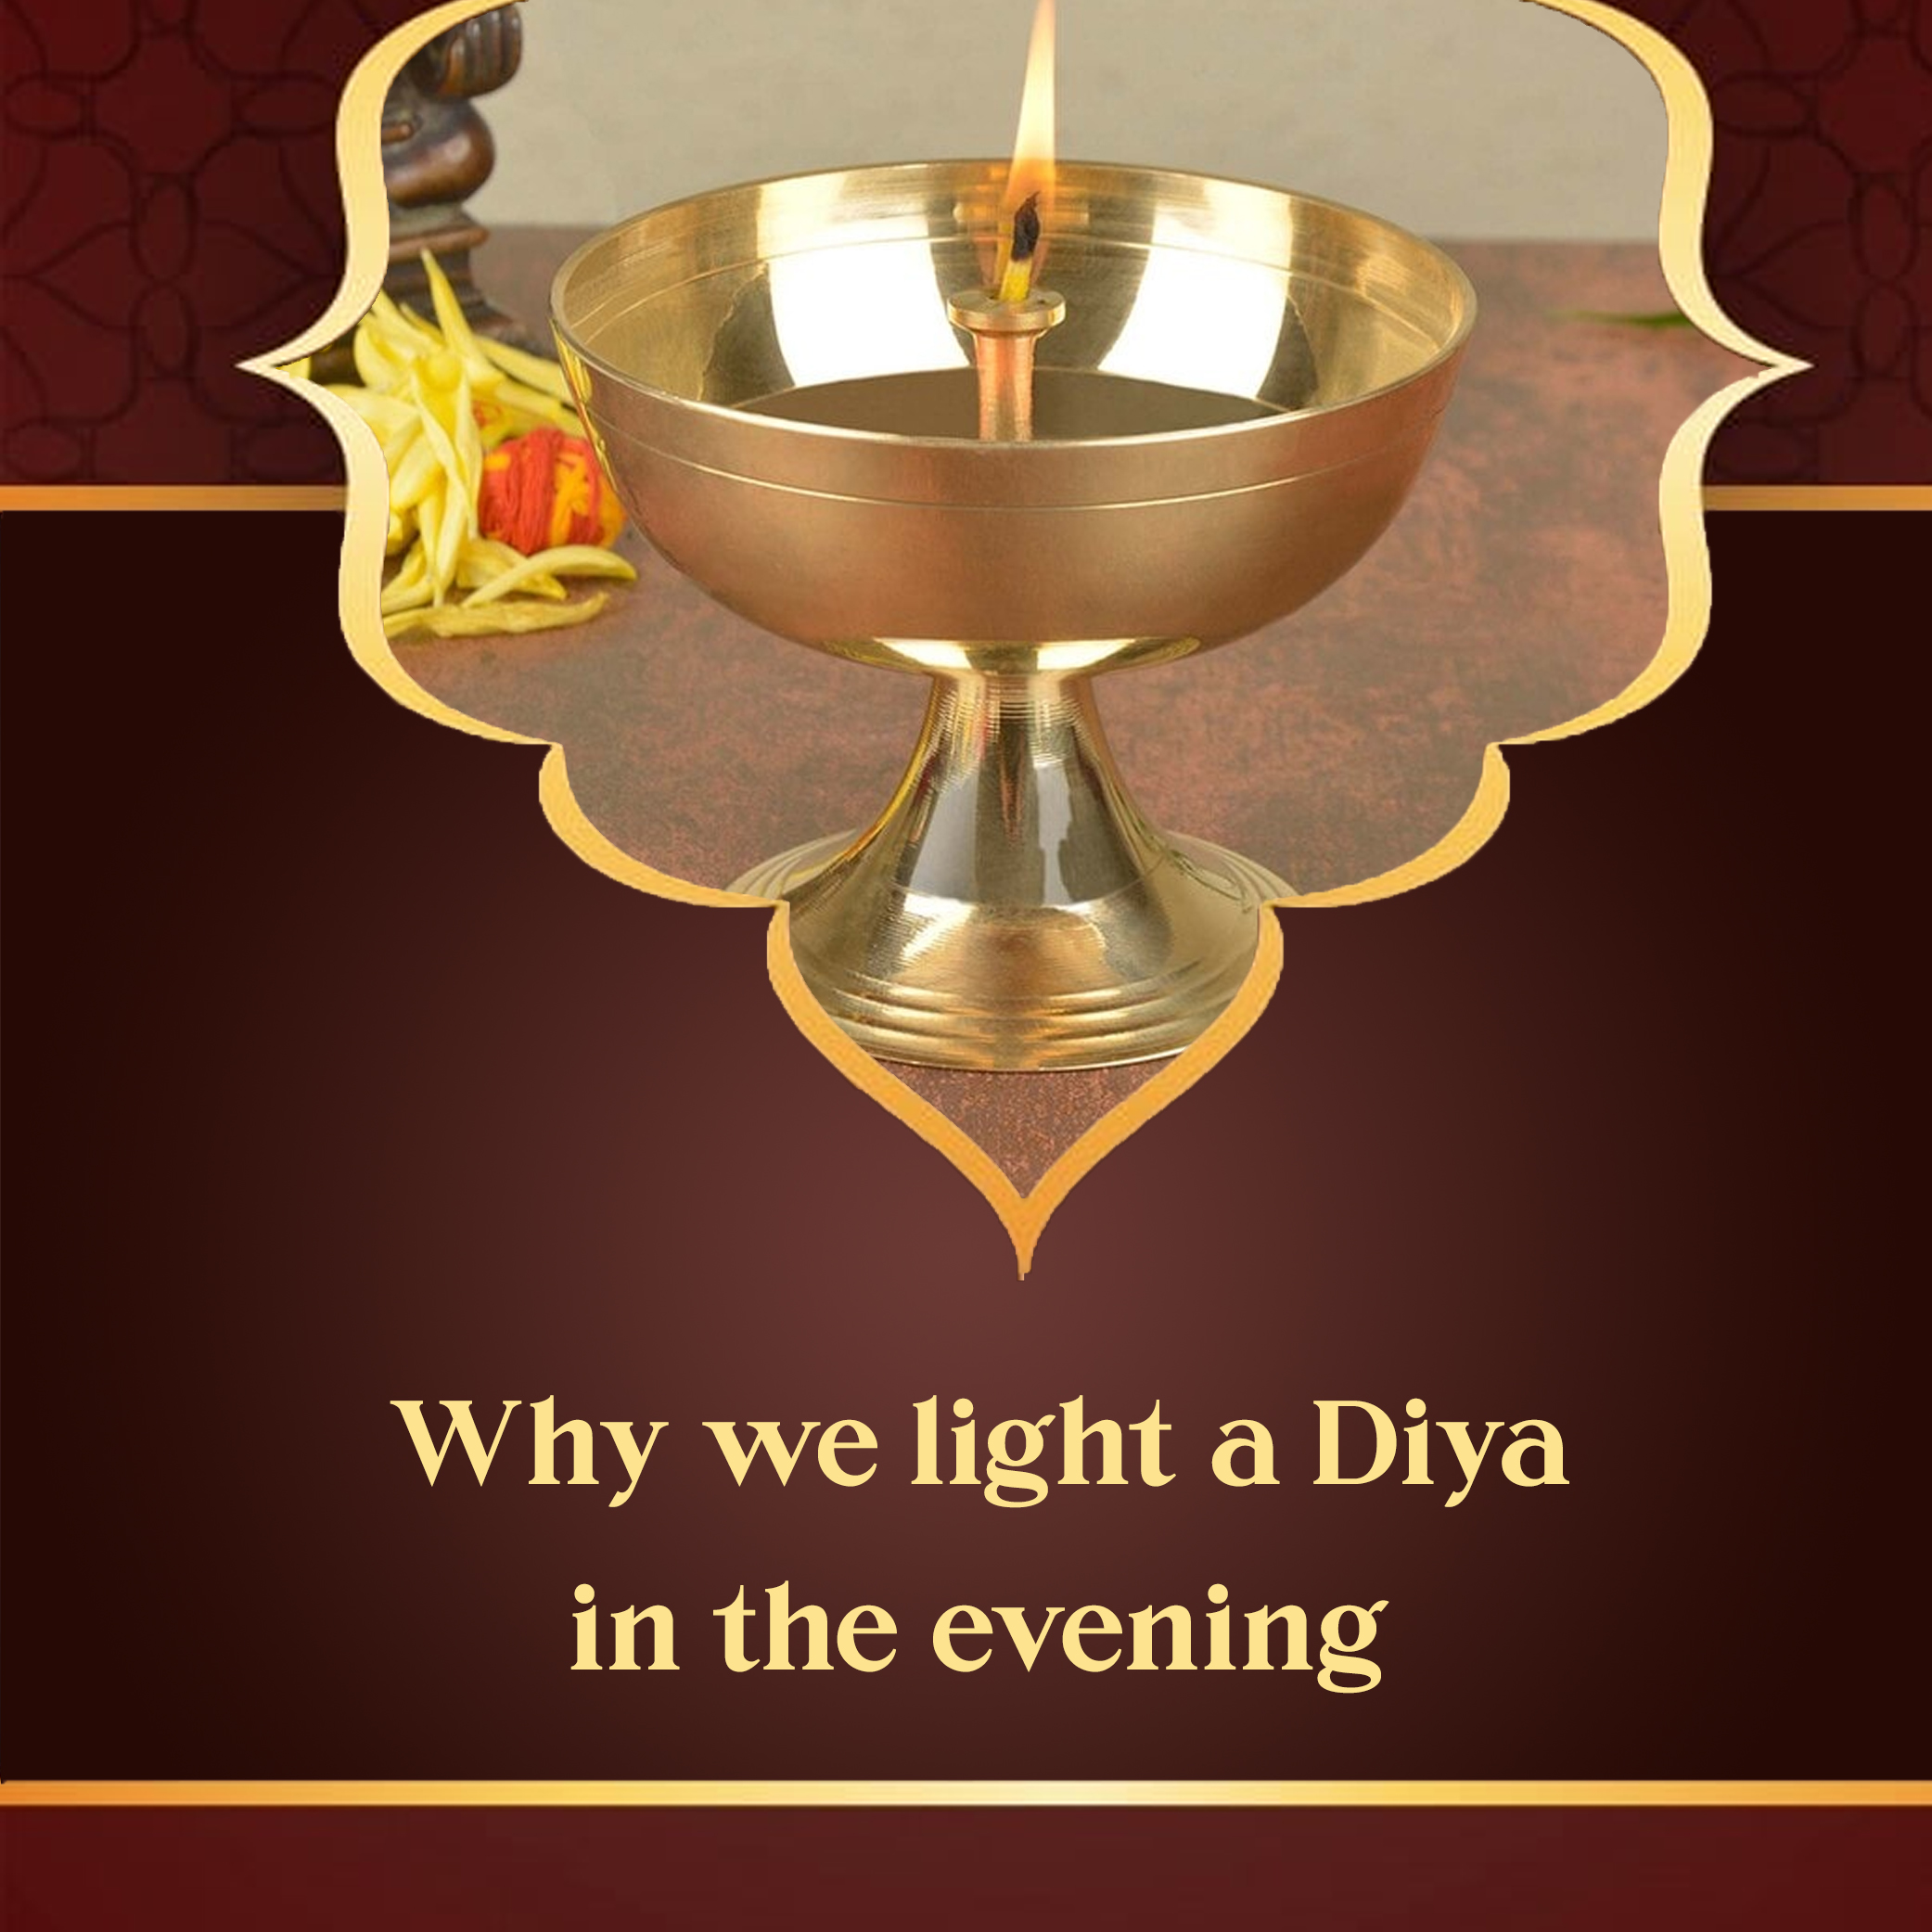 Why we light a Diya in the evening